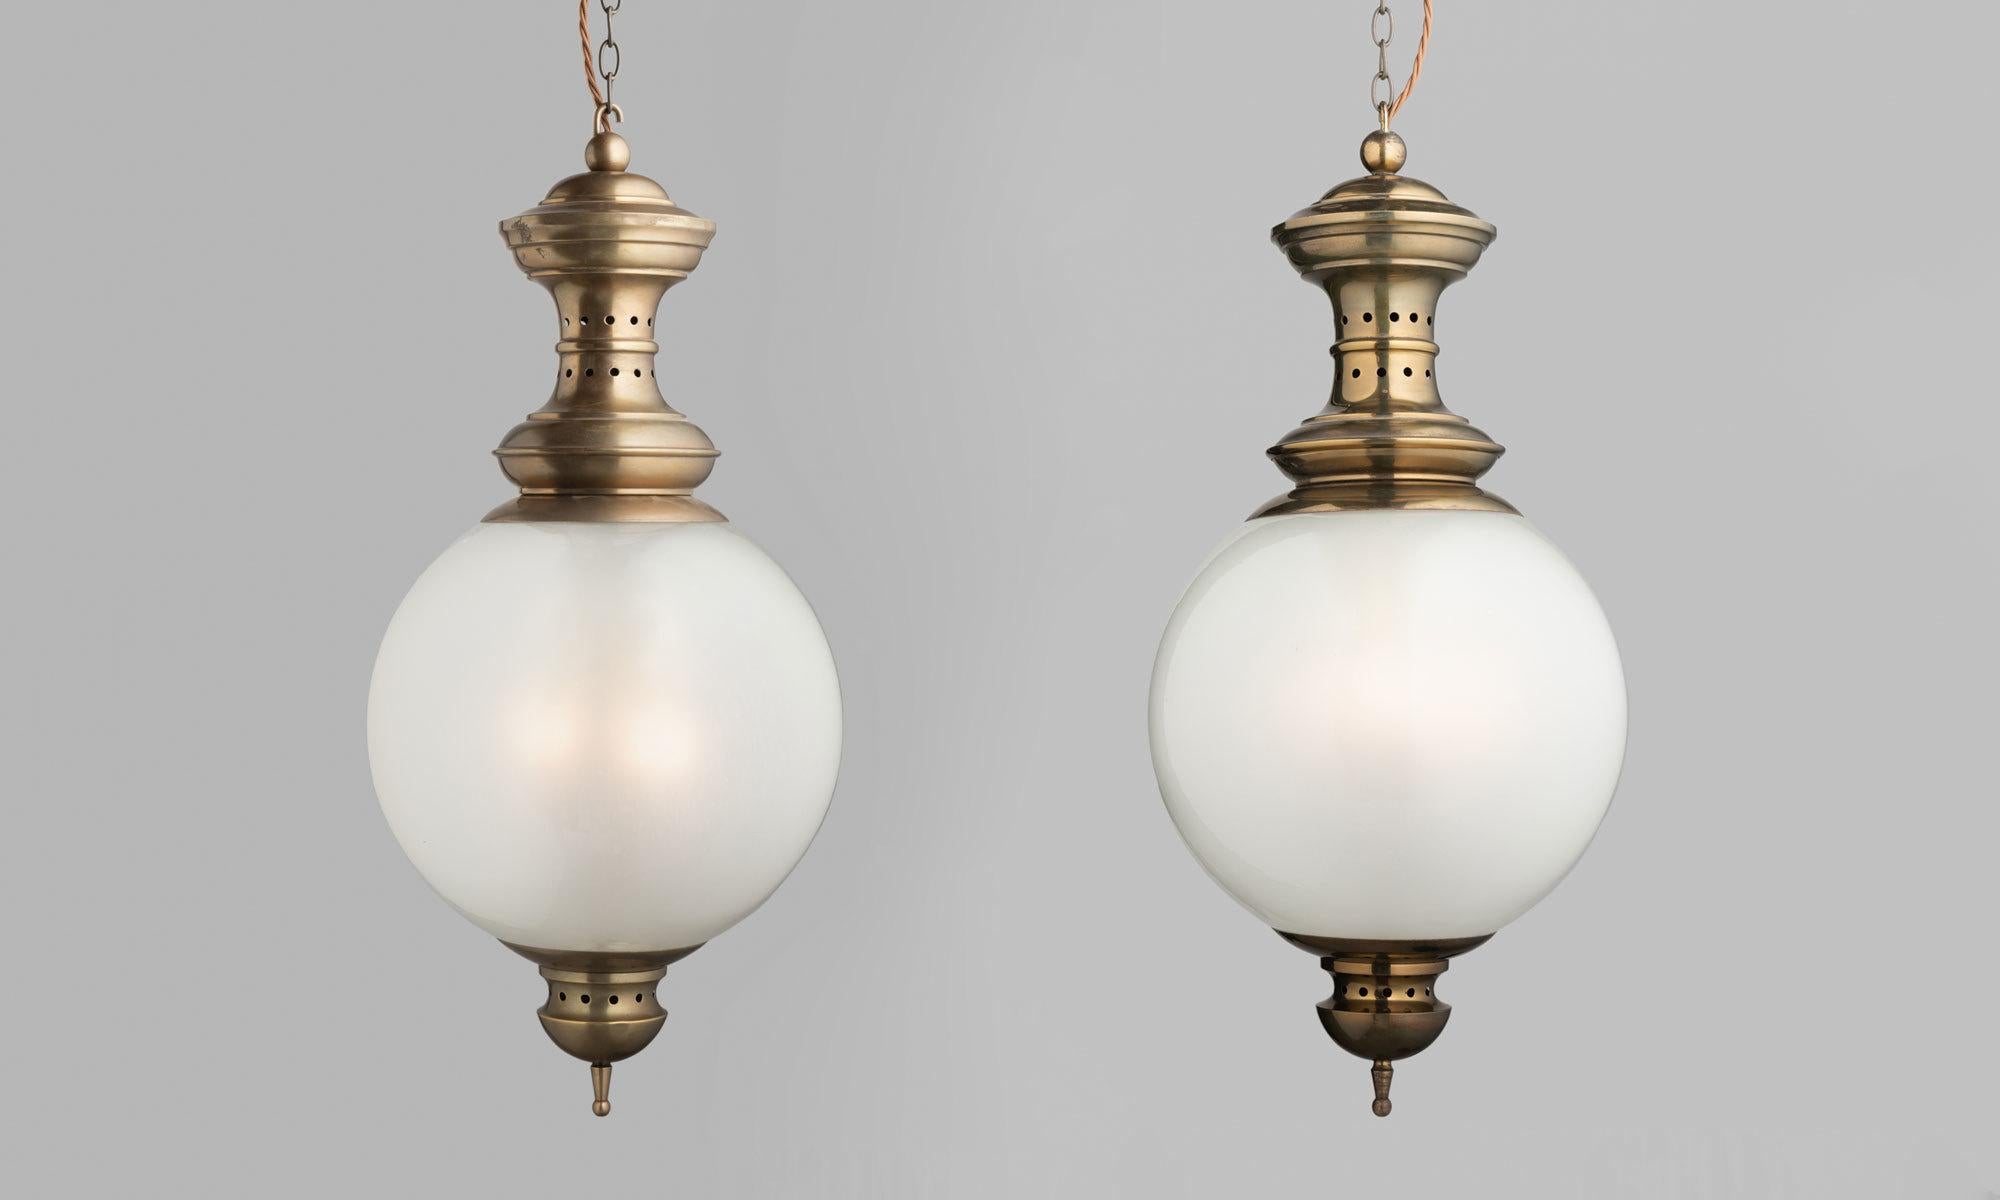 Opaline glass lantern by Luigi Caccia Dominioni for Azucena, Italy, circa 1950.

Elegant form with beautiful patinated brass fitters, one with a glossier finish and the other with more of a matte finish.

Measures: 10.75